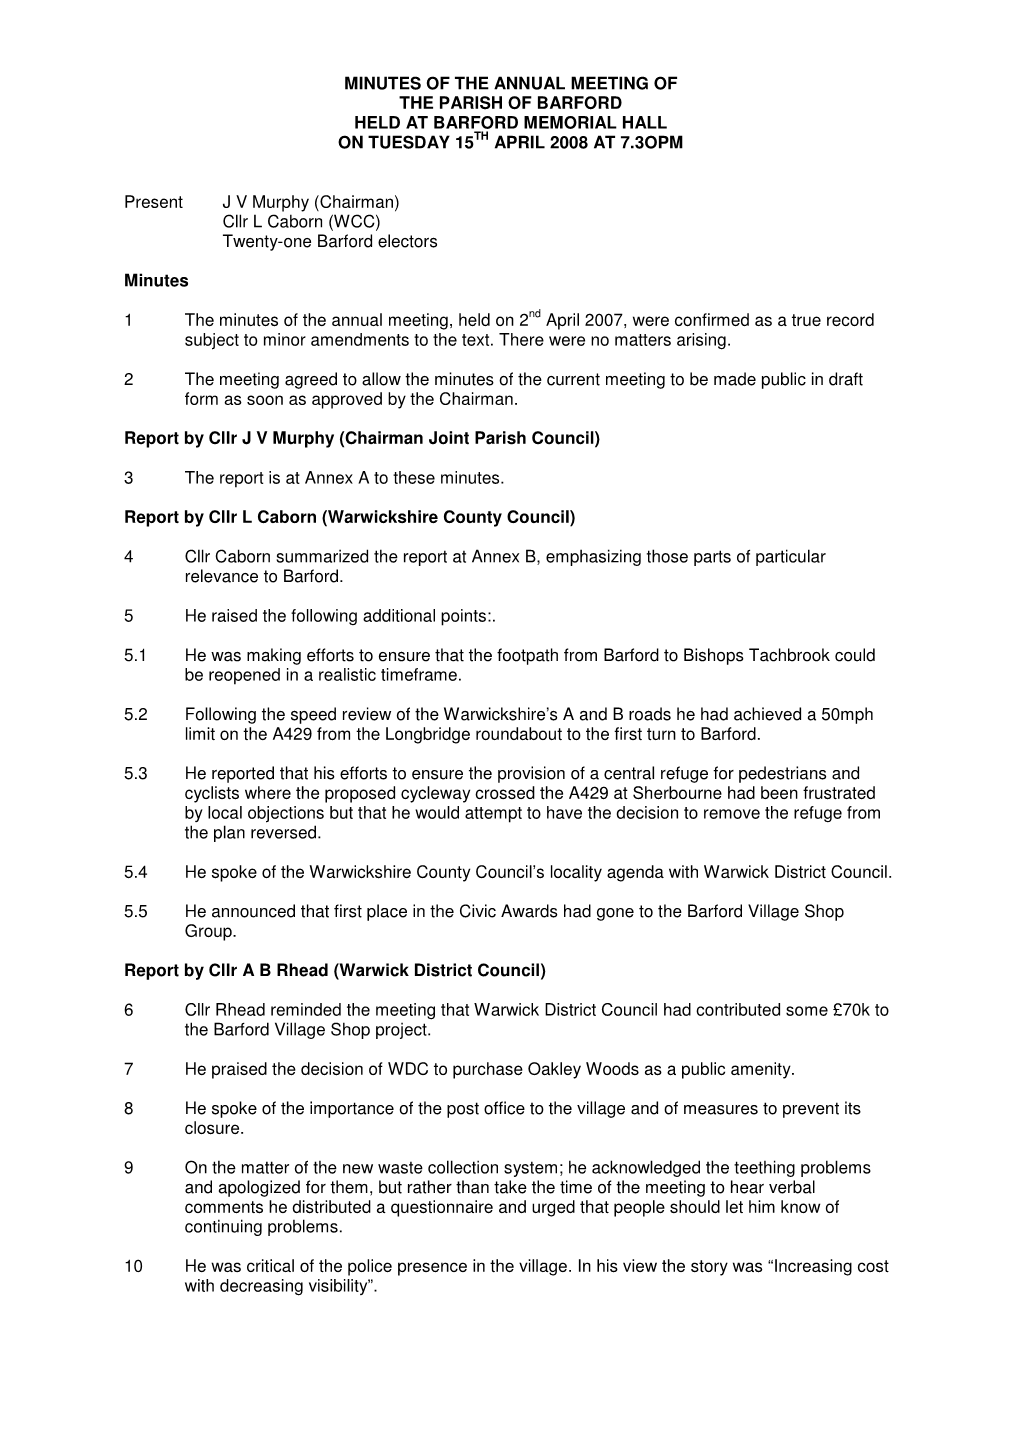 Minutes of the Annual Meeting of the Parish of Barford Held at Barford Memorial Hall on Tuesday 15 Th April 2008 at 7.3Opm